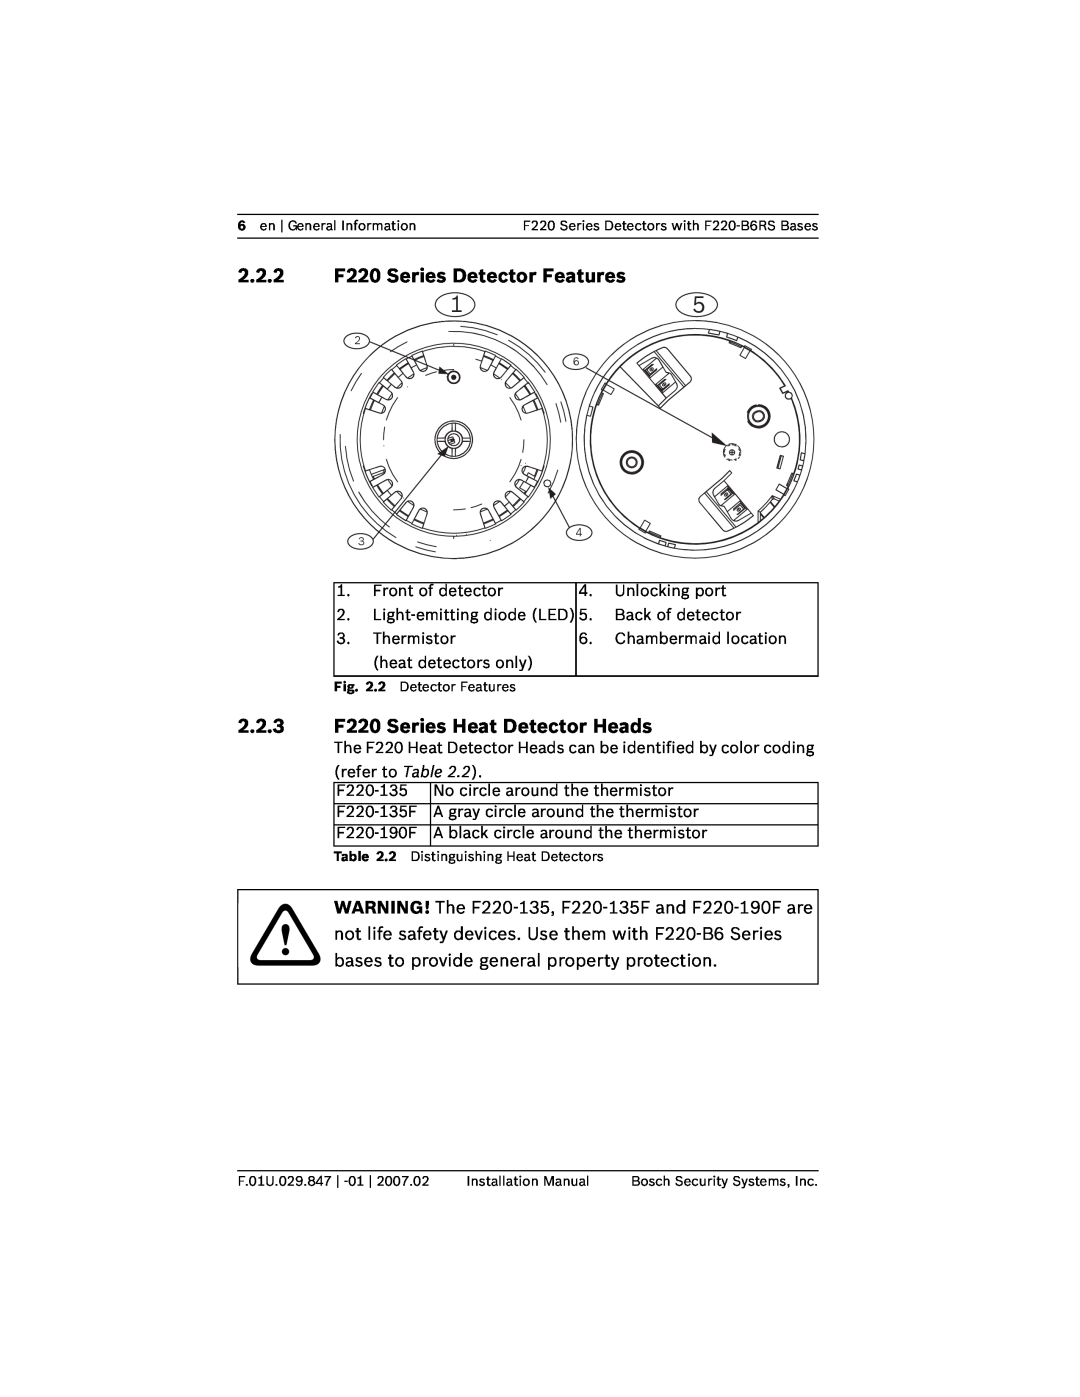 Bosch Appliances F220-B6RS installation manual 2.2.2F220 Series Detector Features, 2.2.3F220 Series Heat Detector Heads 